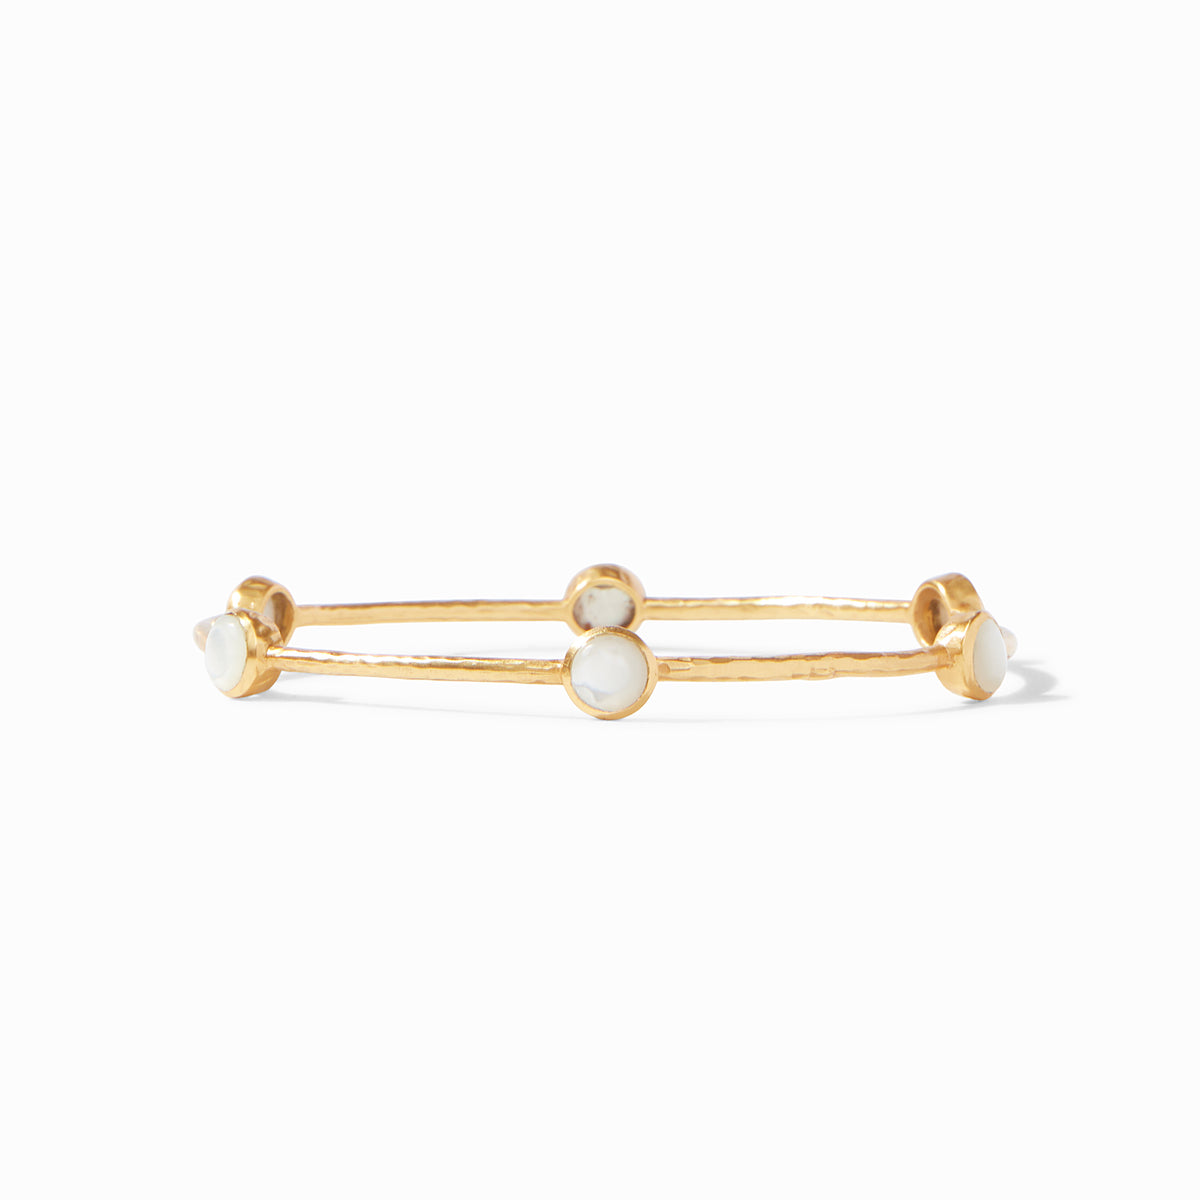 Julie Vos - Milano Bangle, Mother of Pearl / Large